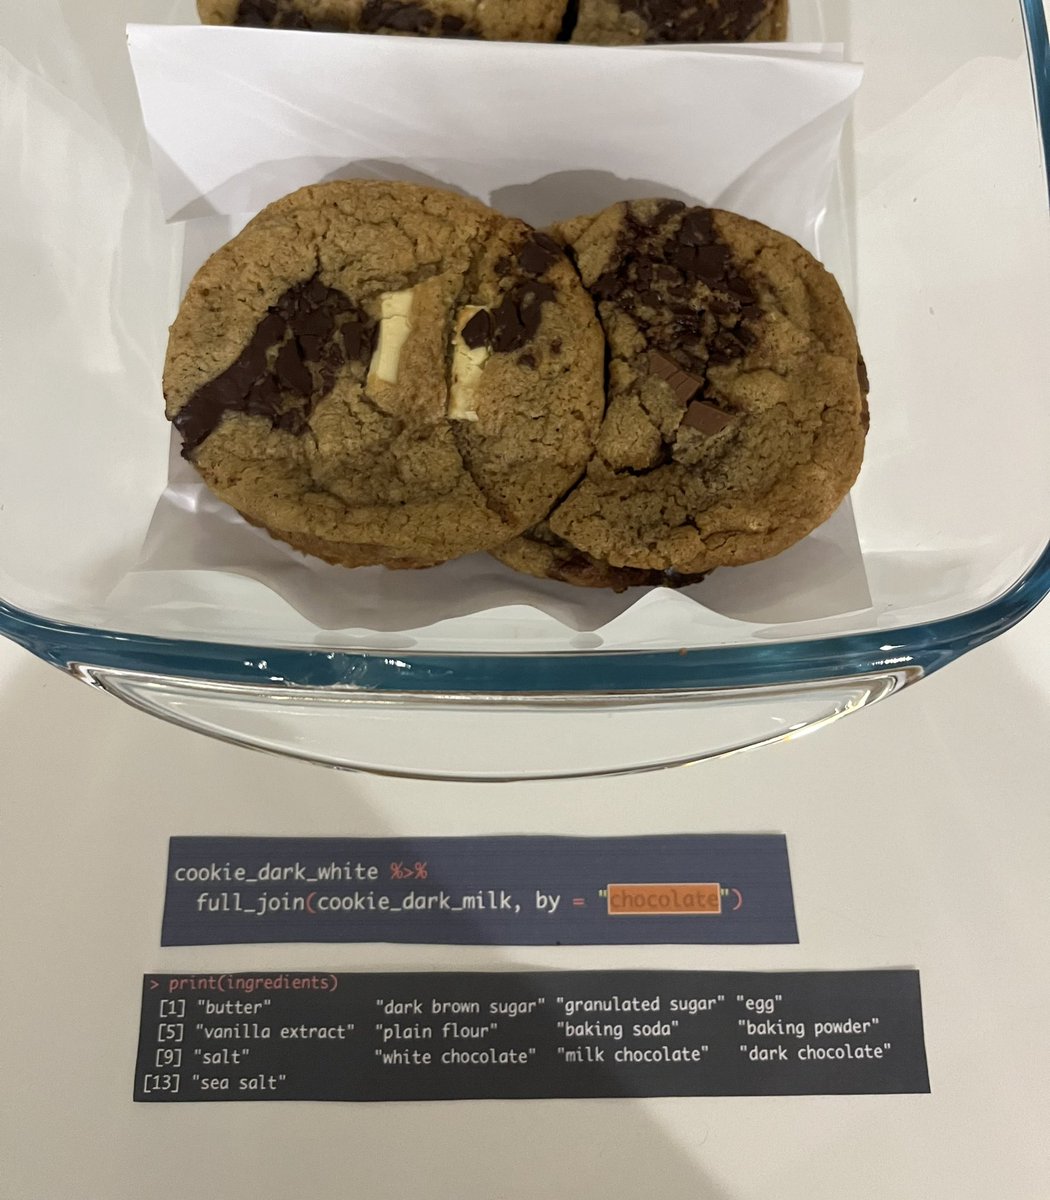 New peak level of nerd unlocked with R dplyr join cookies for work bake off… 😎